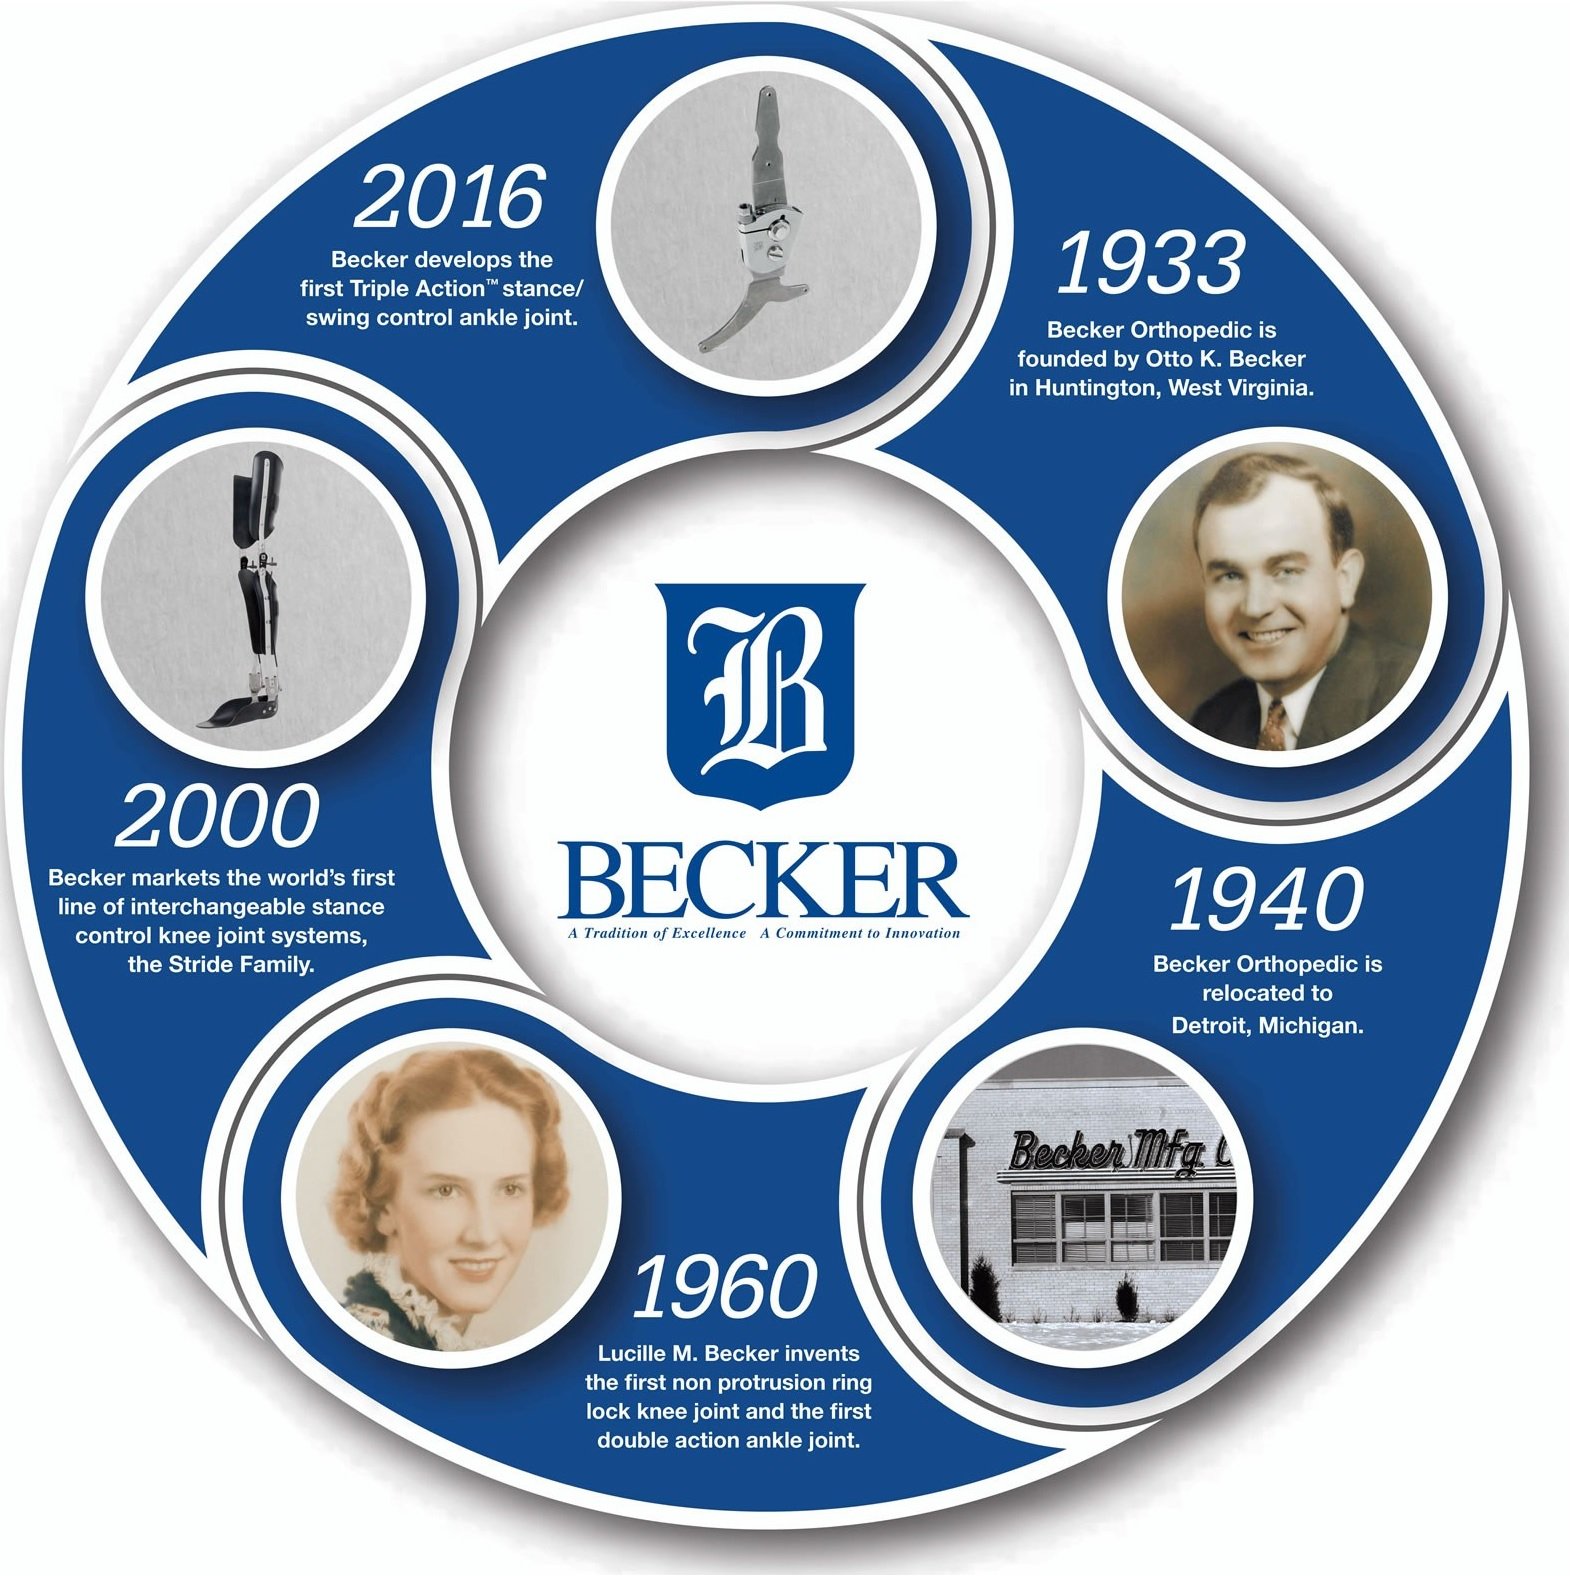 About Becker Orthopedic